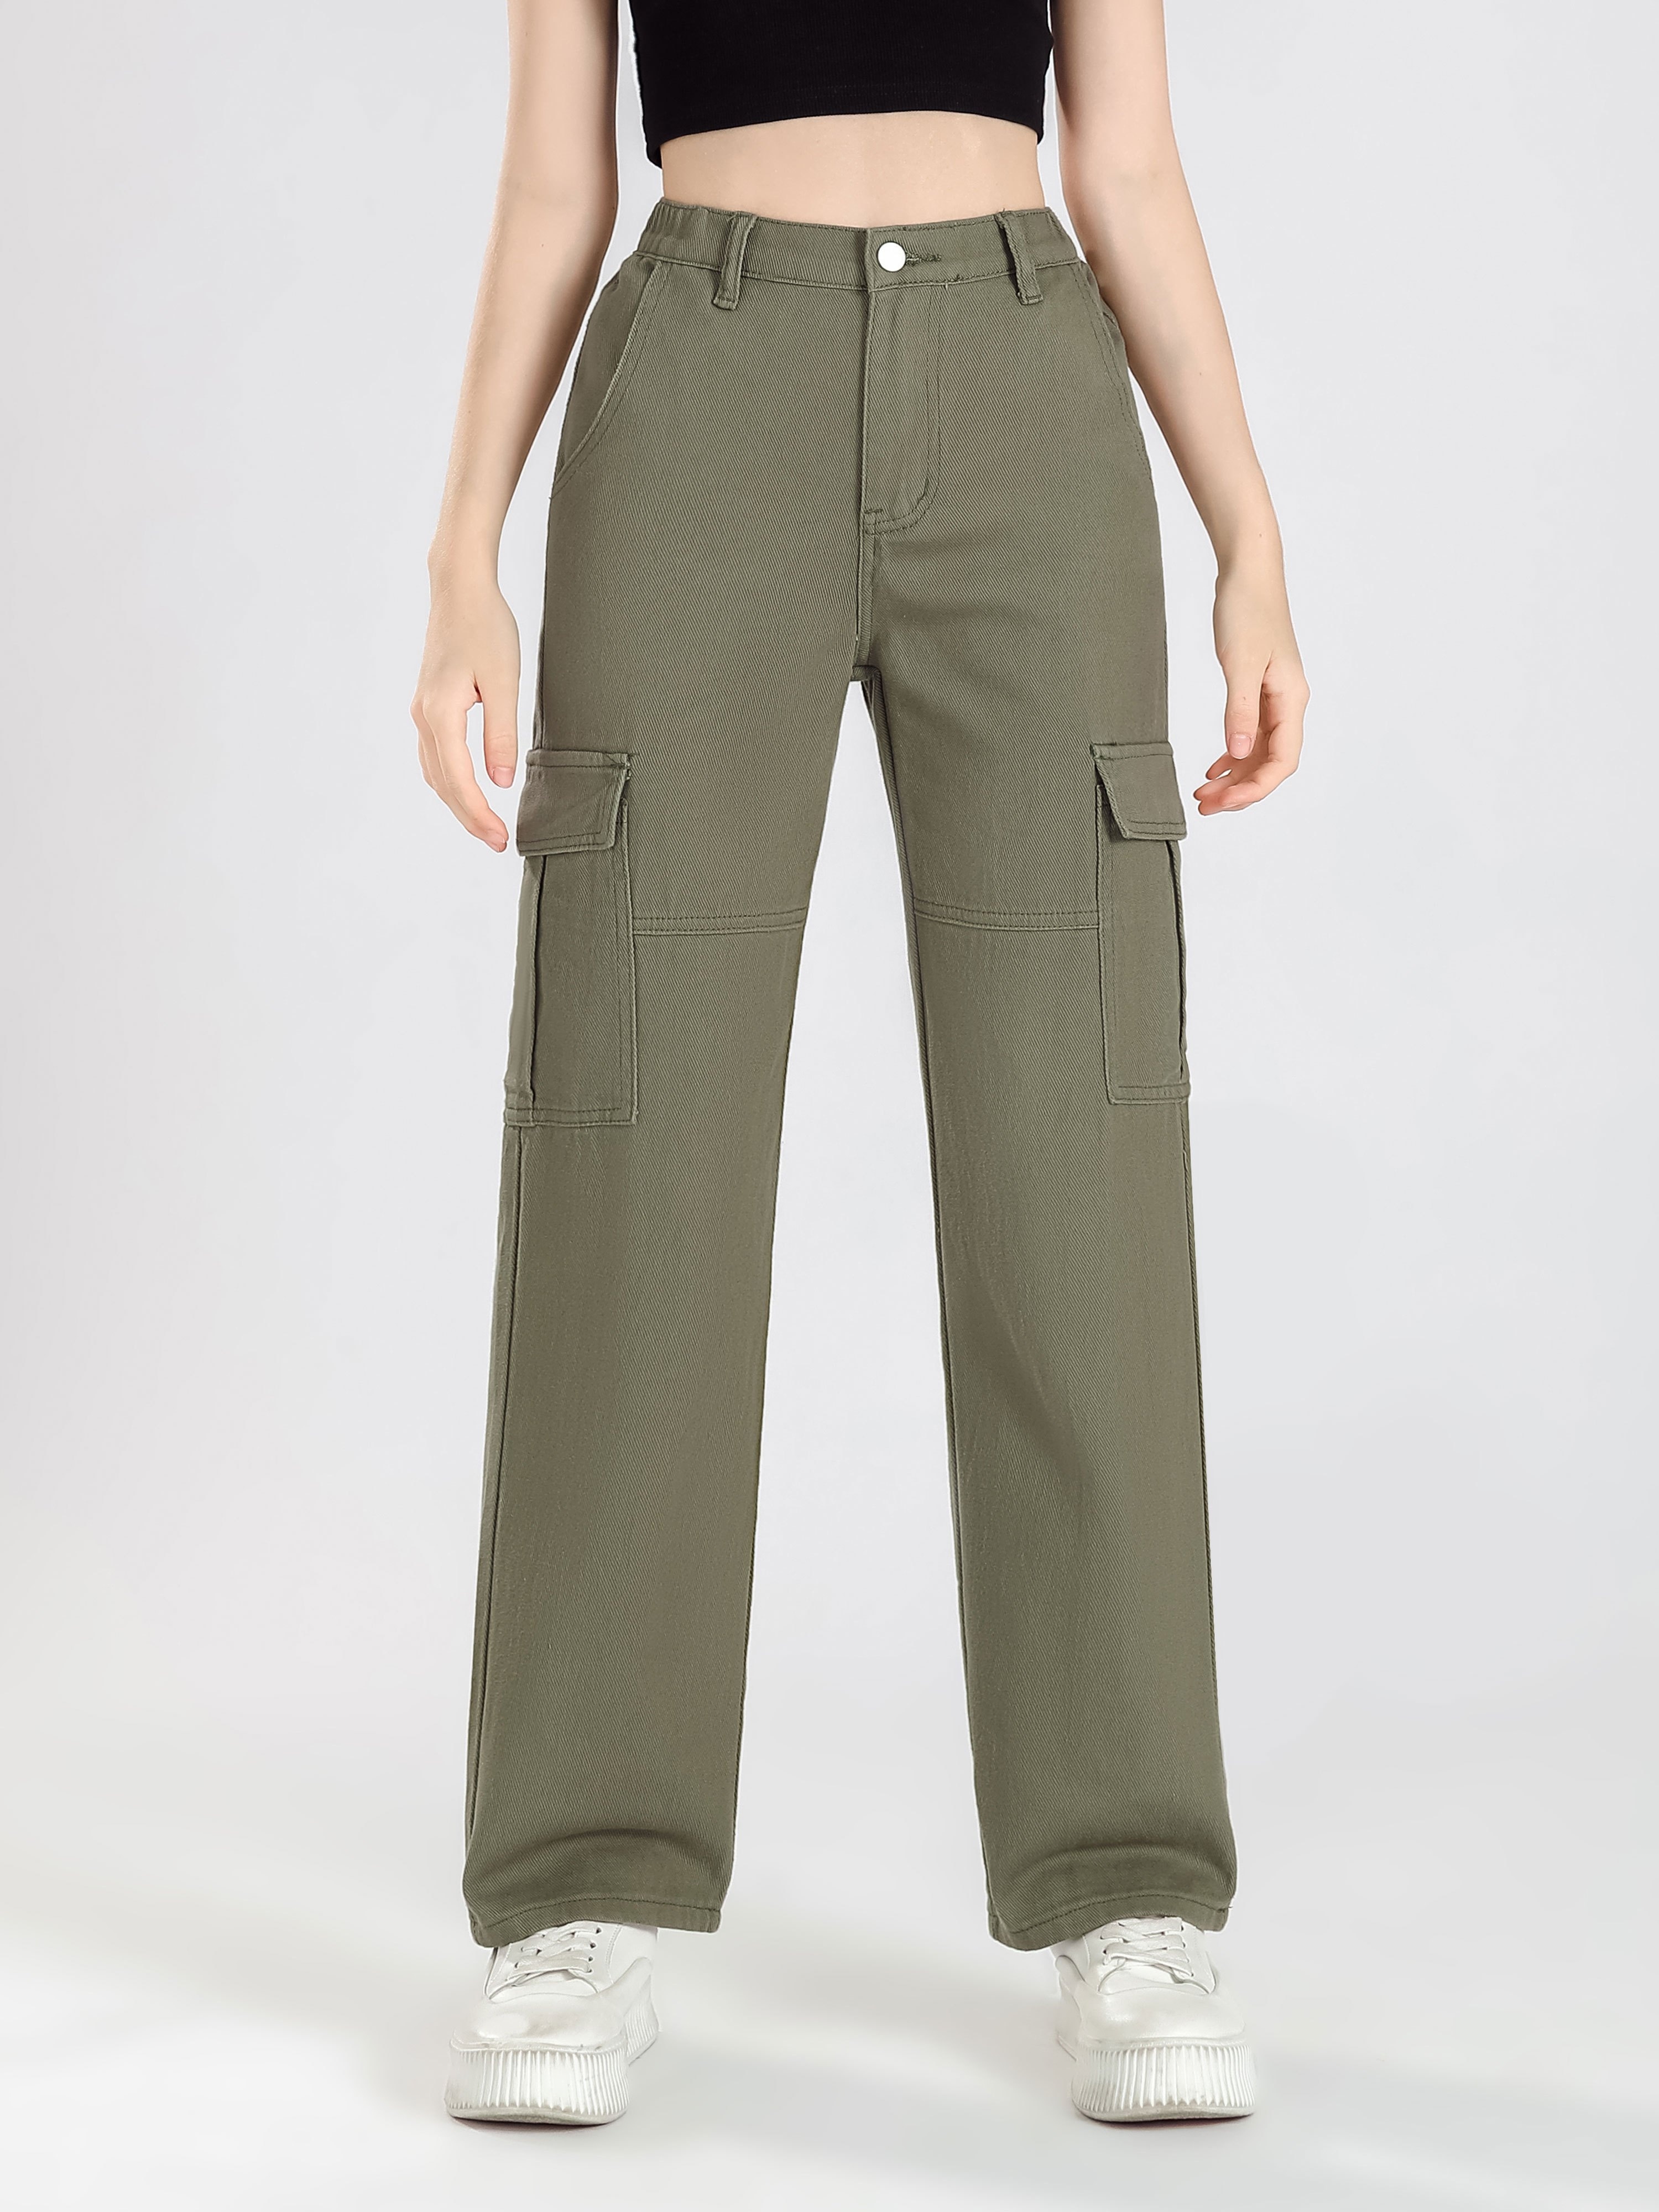 Shop Pants & Trousers for Teenage Girls Online - Country Road